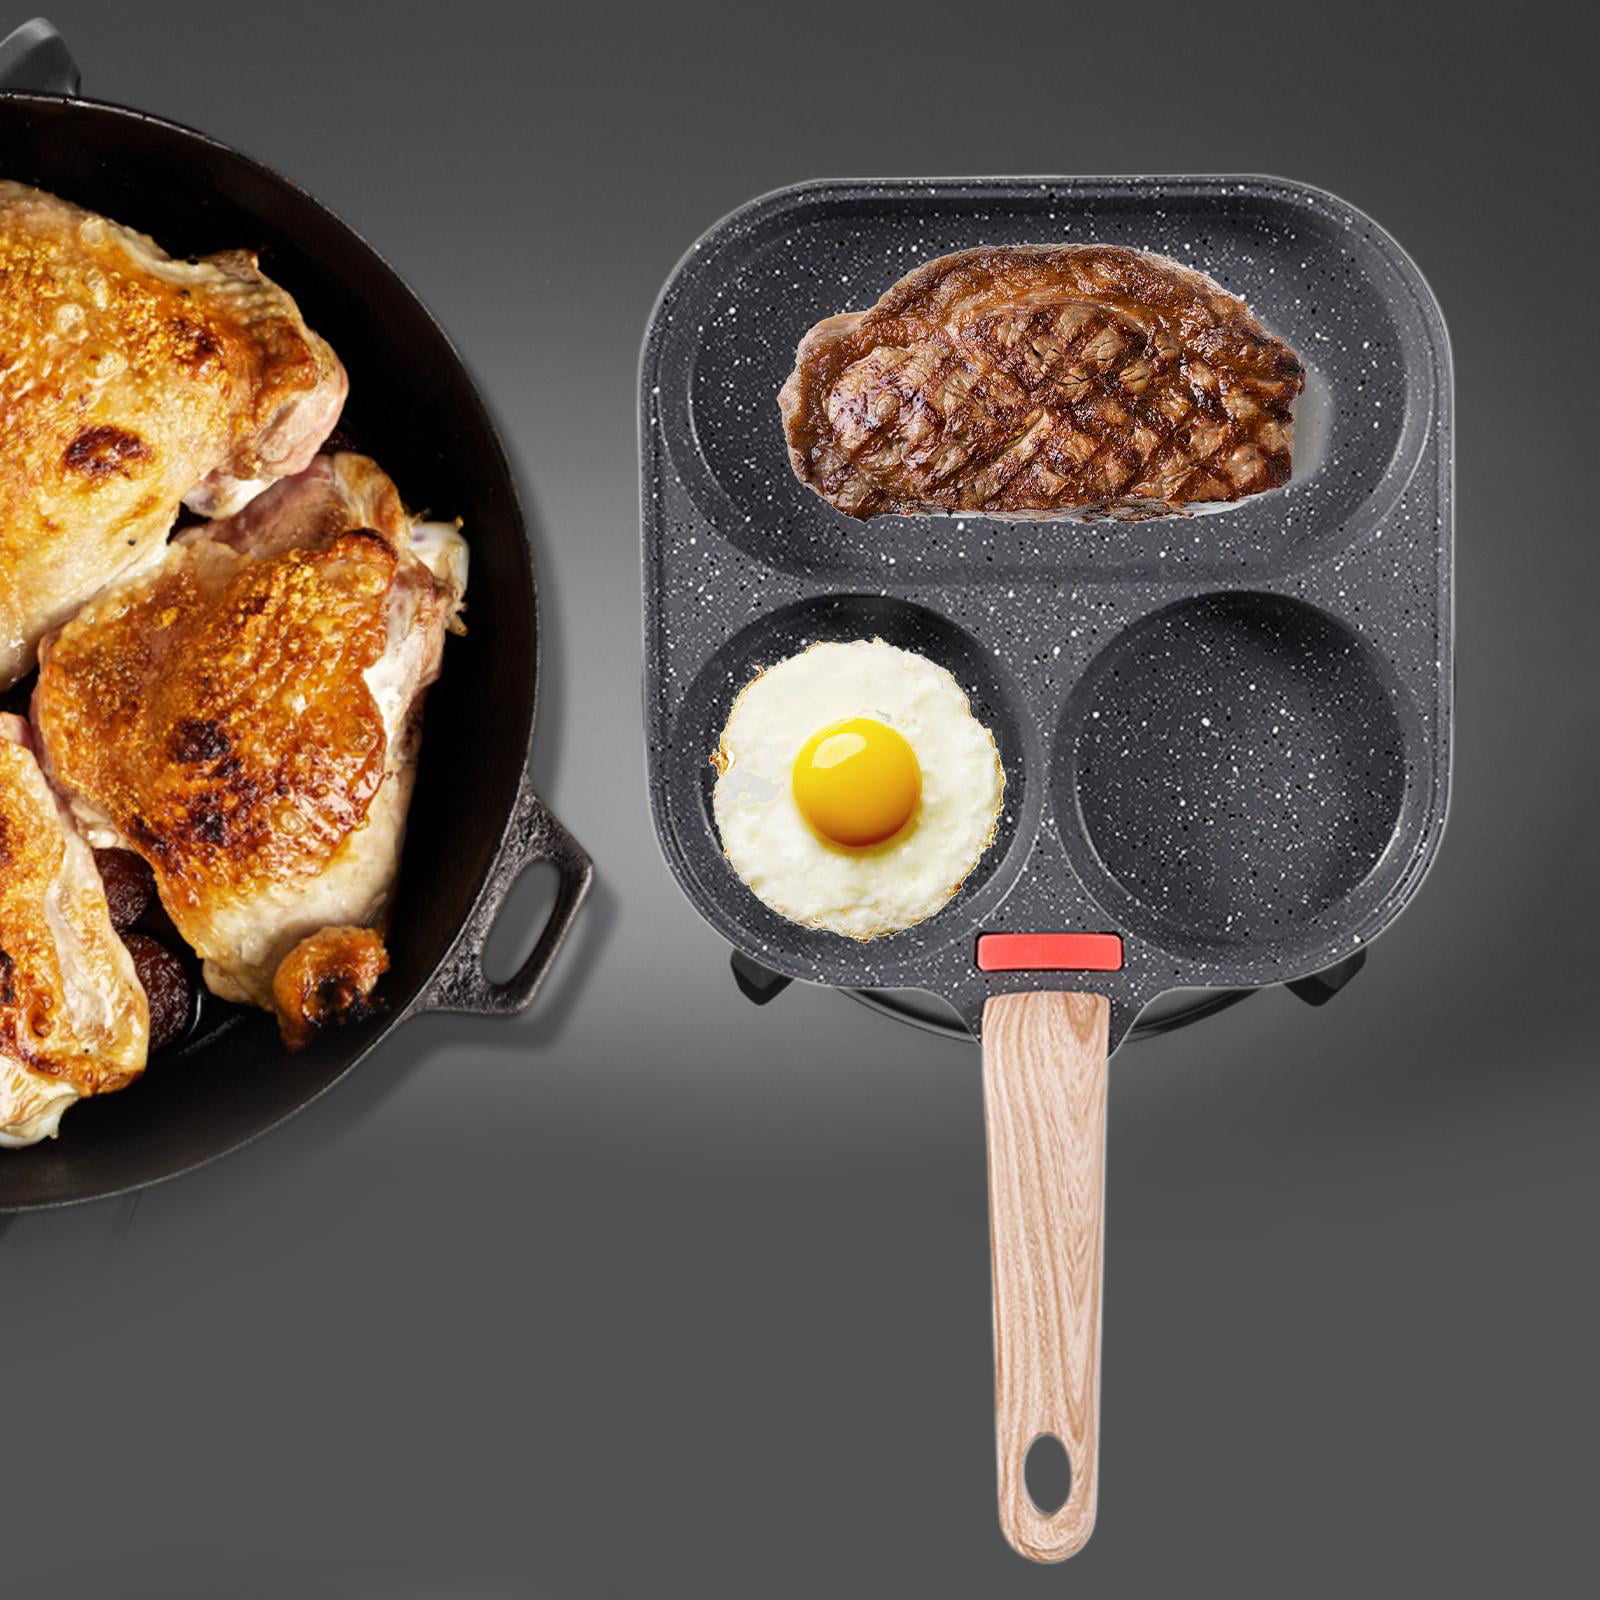  universal Nonstick Pan 7 Inches / 18 cm Diameter, Frying Pan  With Lid For Bacon, Pancakes, and Steaks, Egg Pan with Ergonomic Handle:  Home & Kitchen